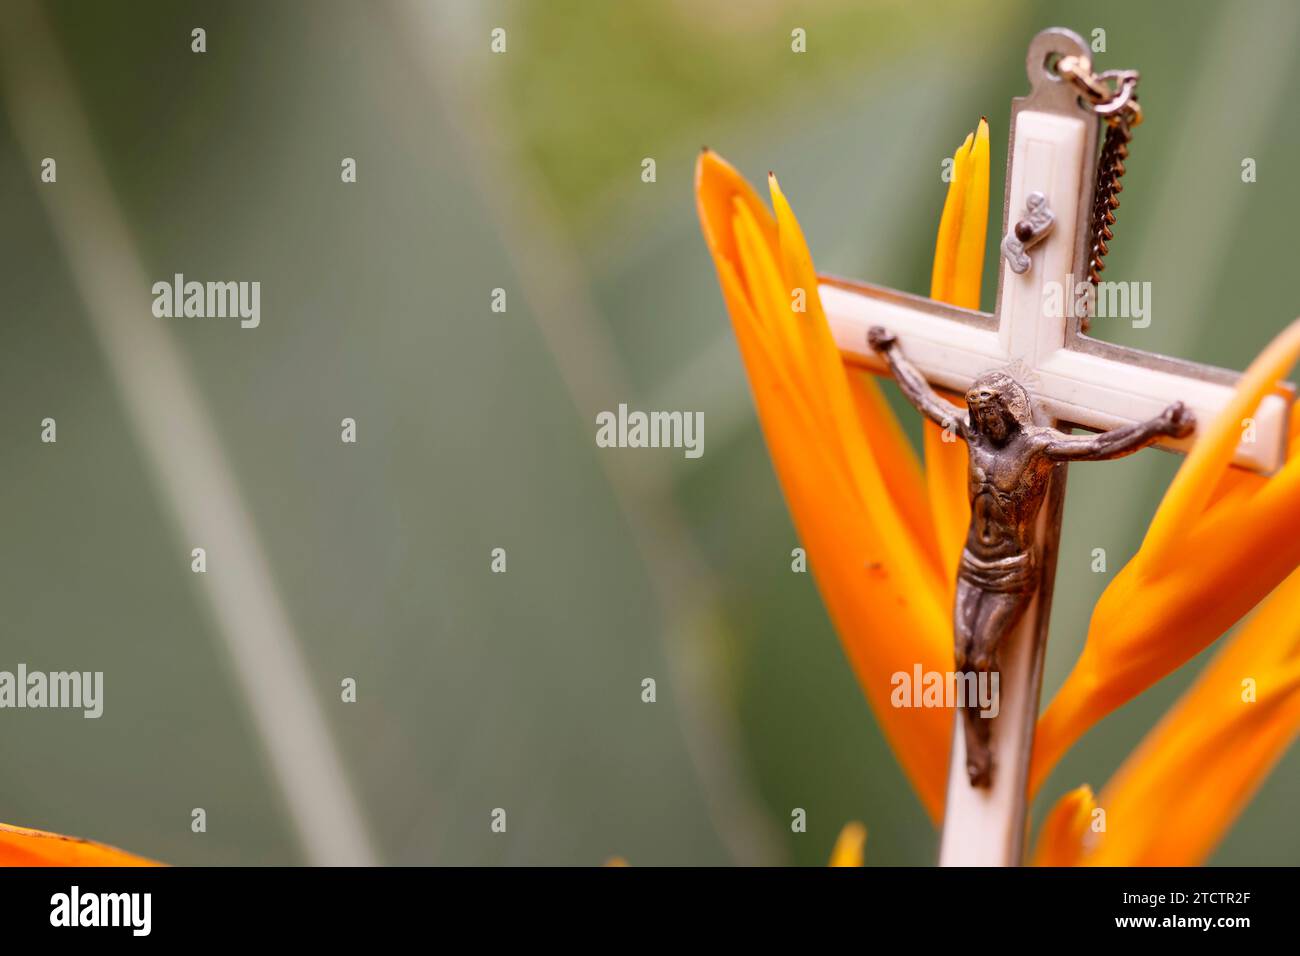 Crucifix of Jesus on a tropical flower. Pray in nature. Stock Photo